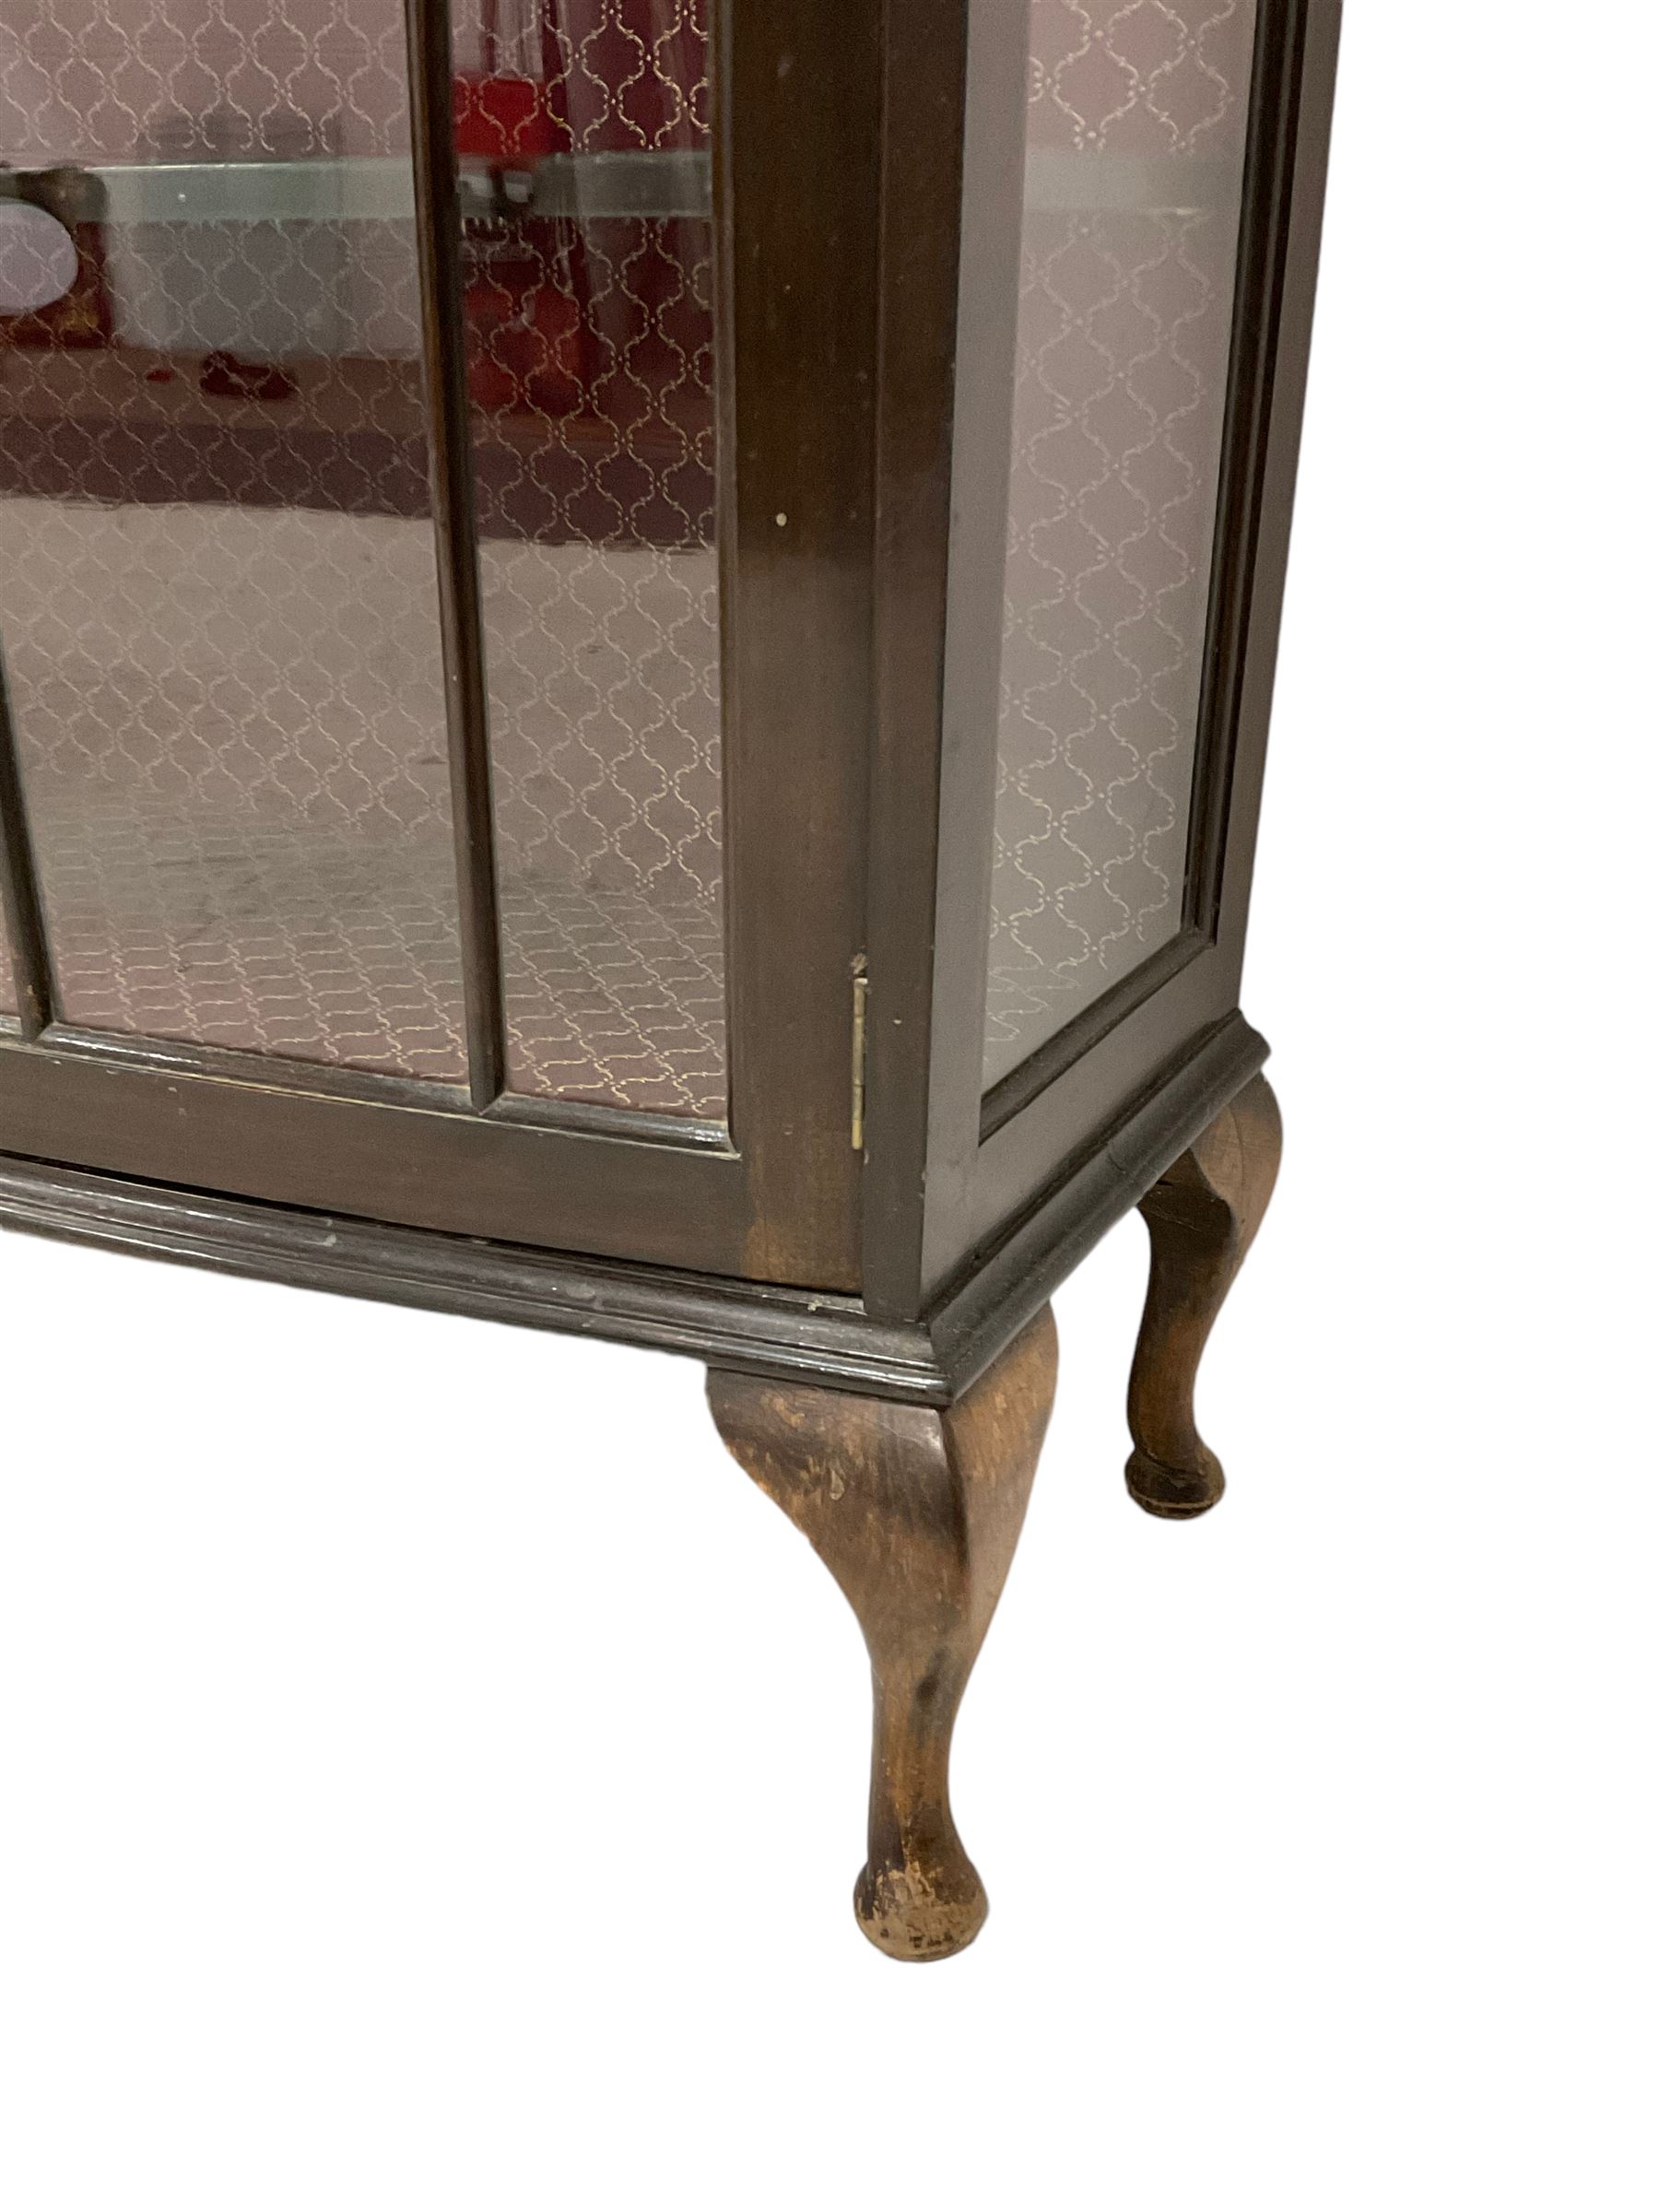 Early 20th century mahogany bow-front display cabinet - Image 3 of 4